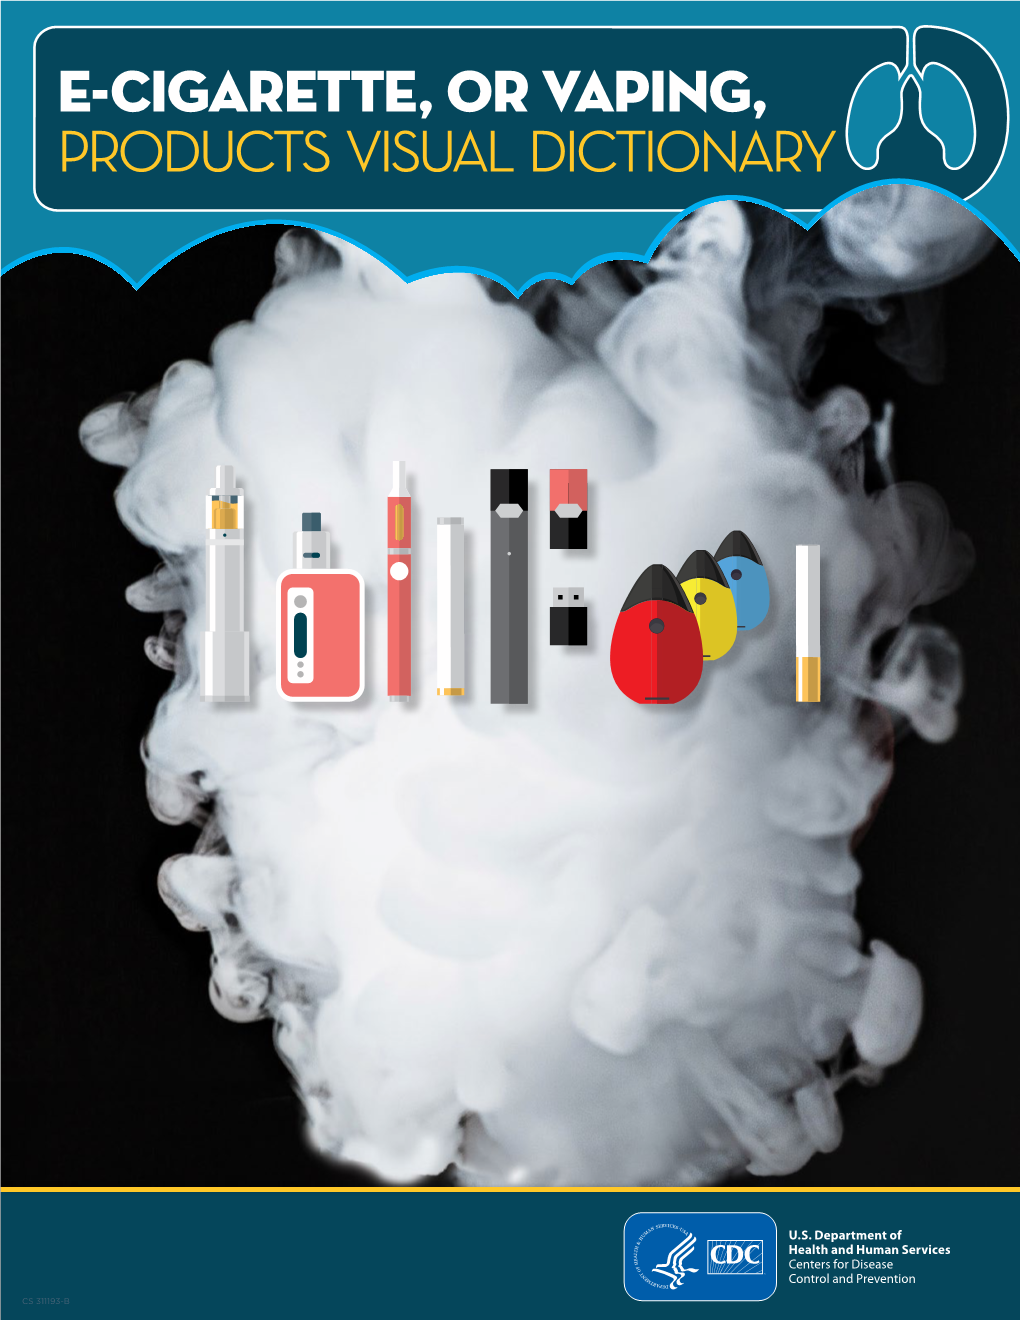 CDC: E-Cigarette, Or Vaping Product Visual Dictionary